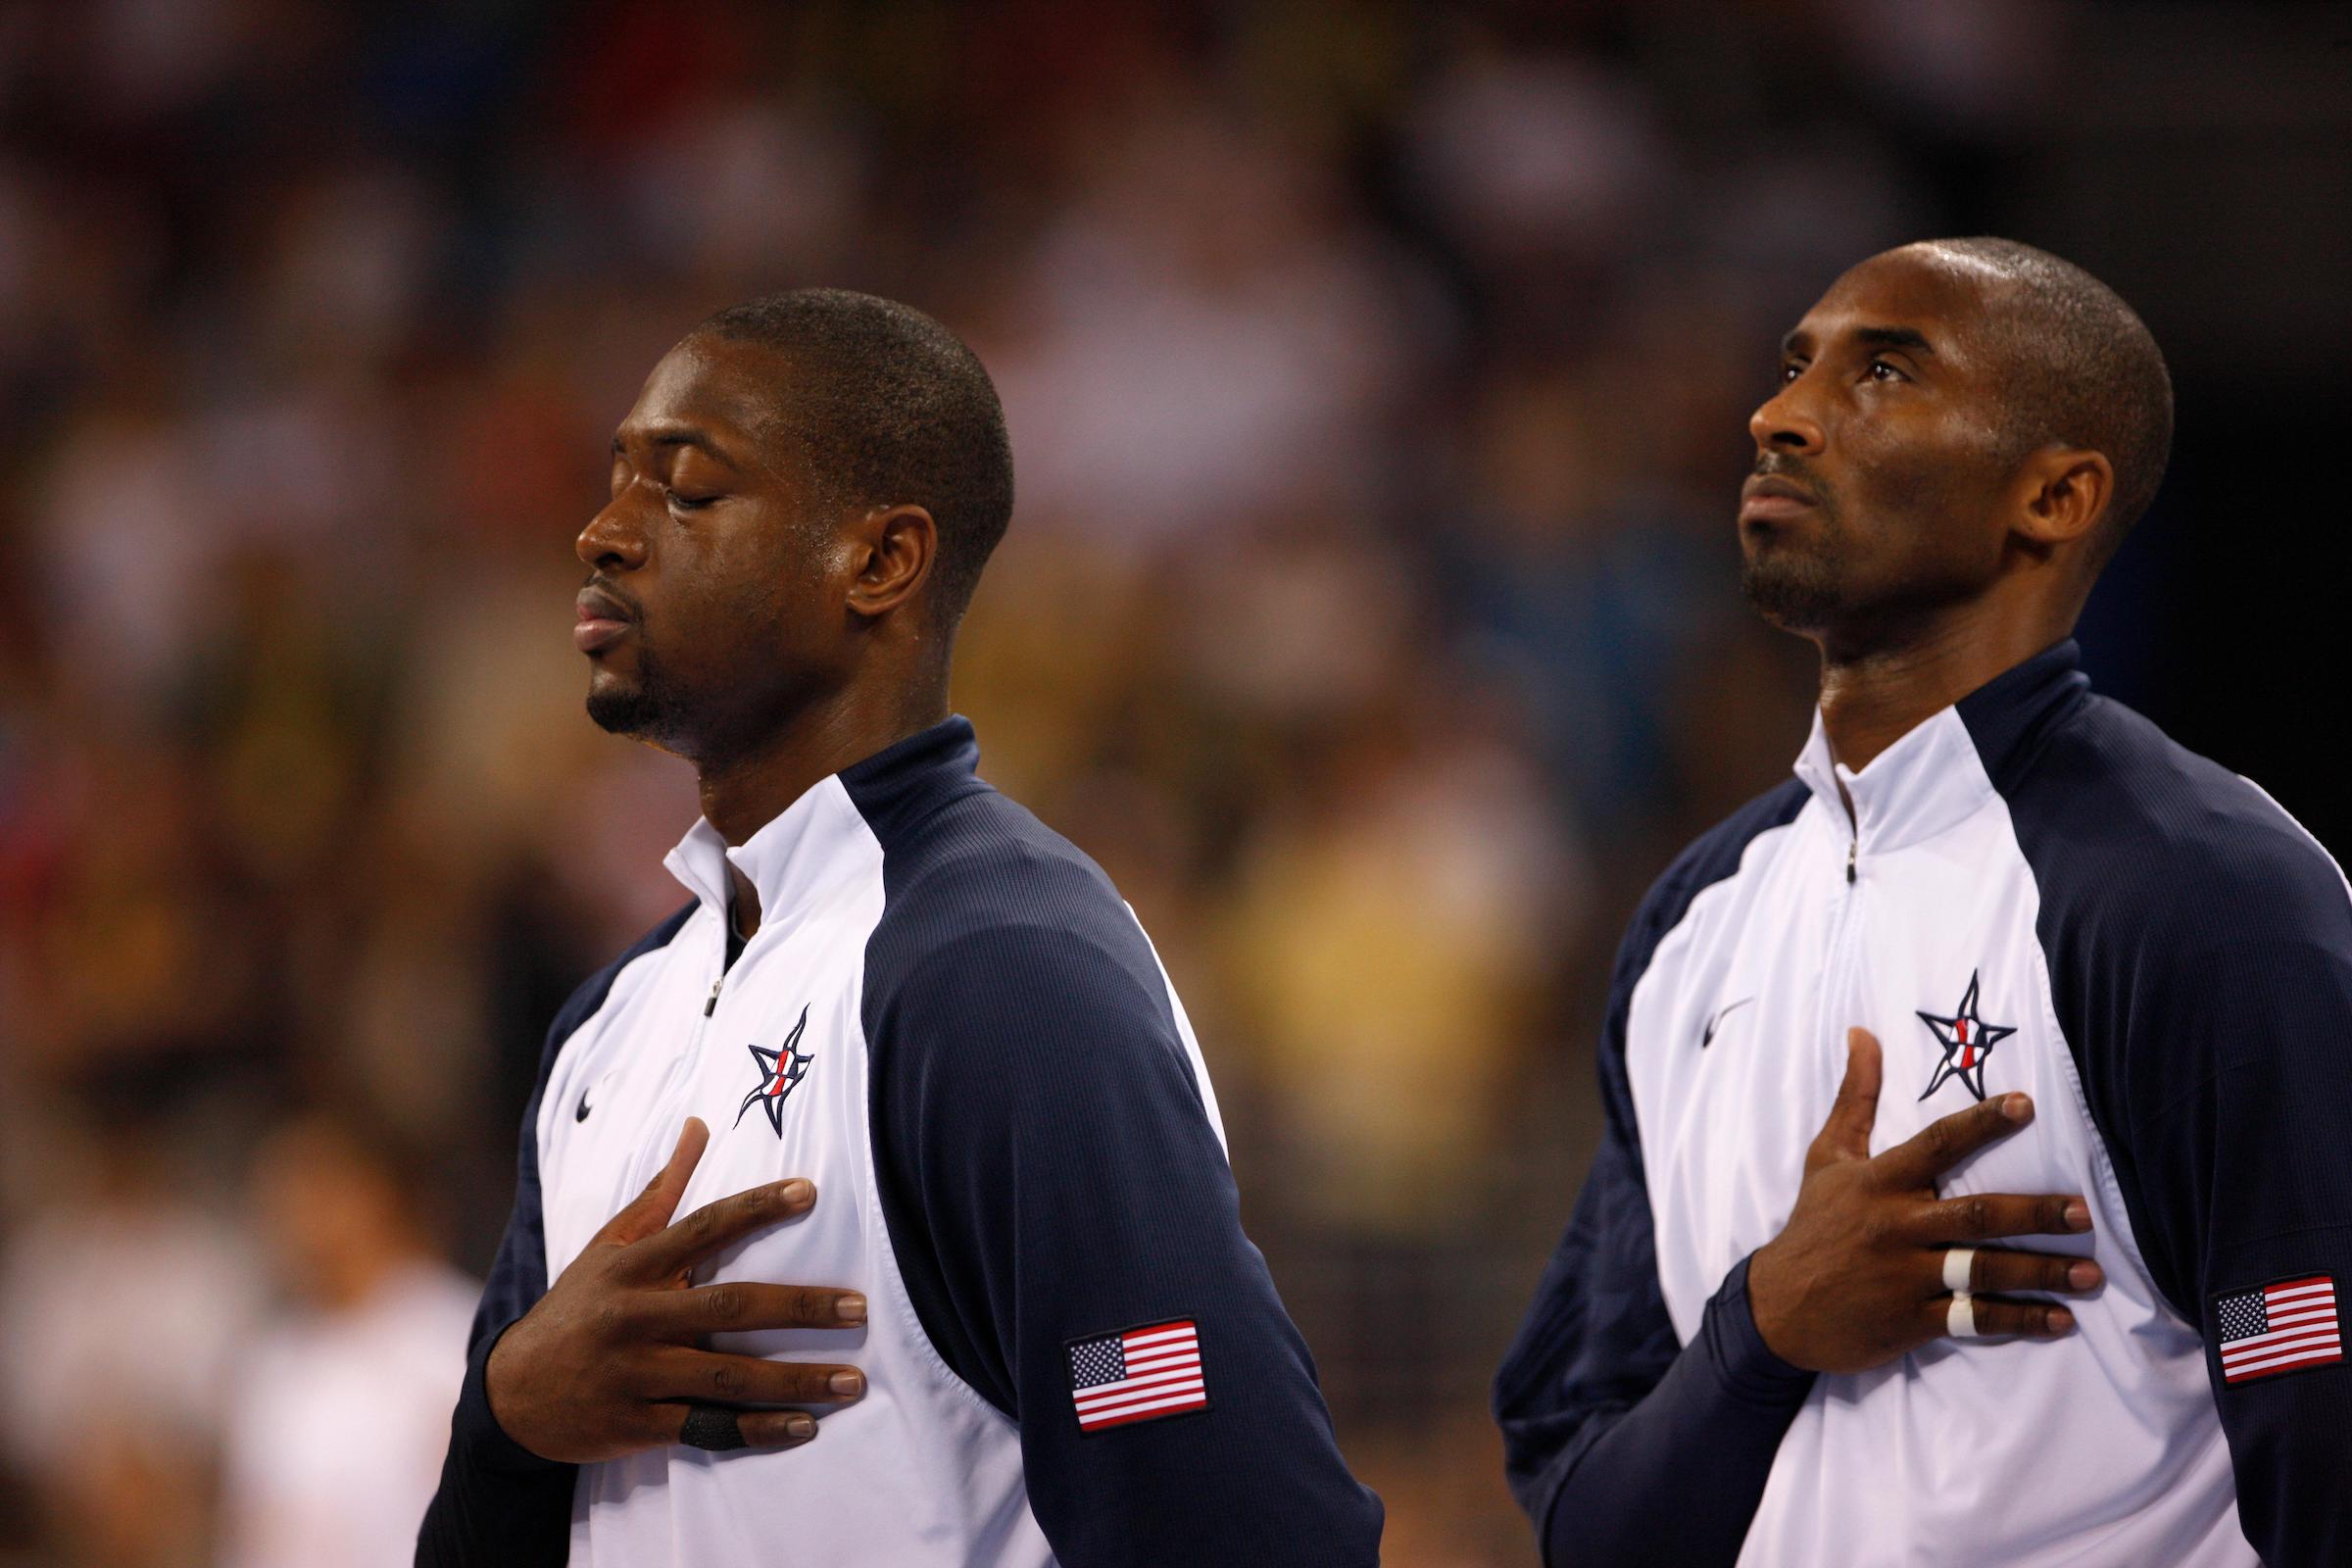 Beijing 2008 OG, Basketball Men - Final, United States of America (USA) 1st - Spain (ESP) 2nd, Dwyane WADE and Kobe BRYANT (USA) with their hands on their hearts.